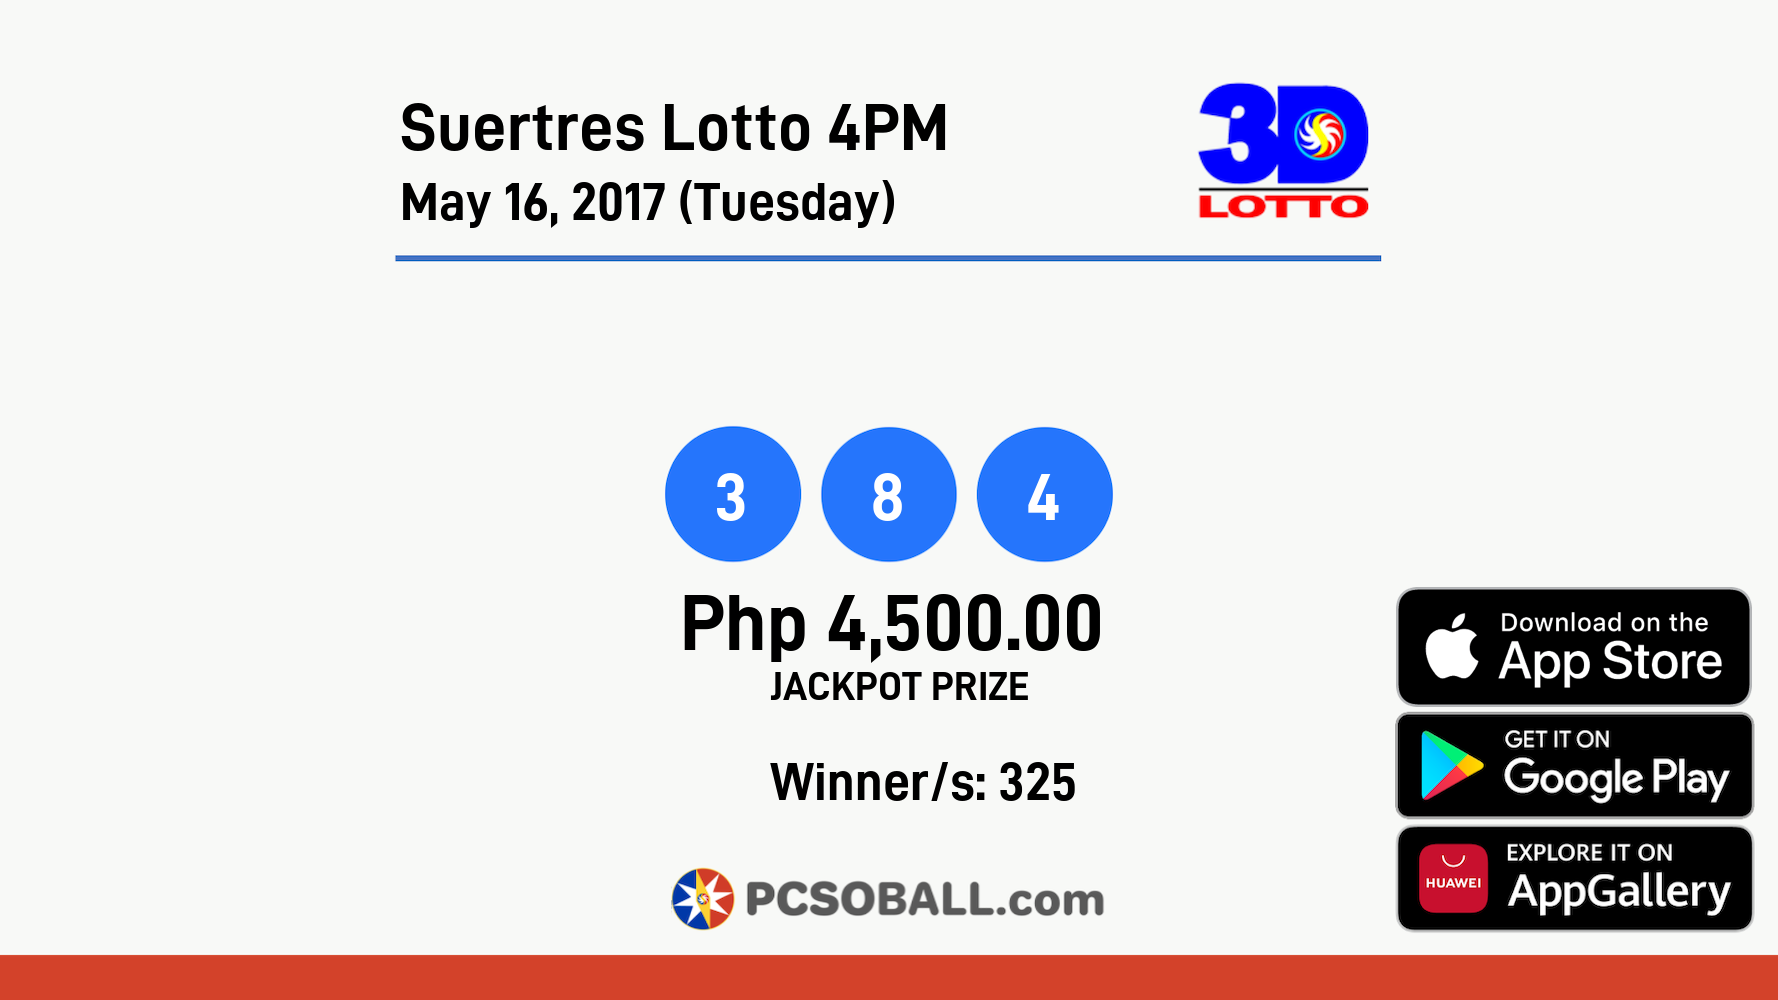 Suertres Lotto 4PM May 16, 2017 (Tuesday) Result